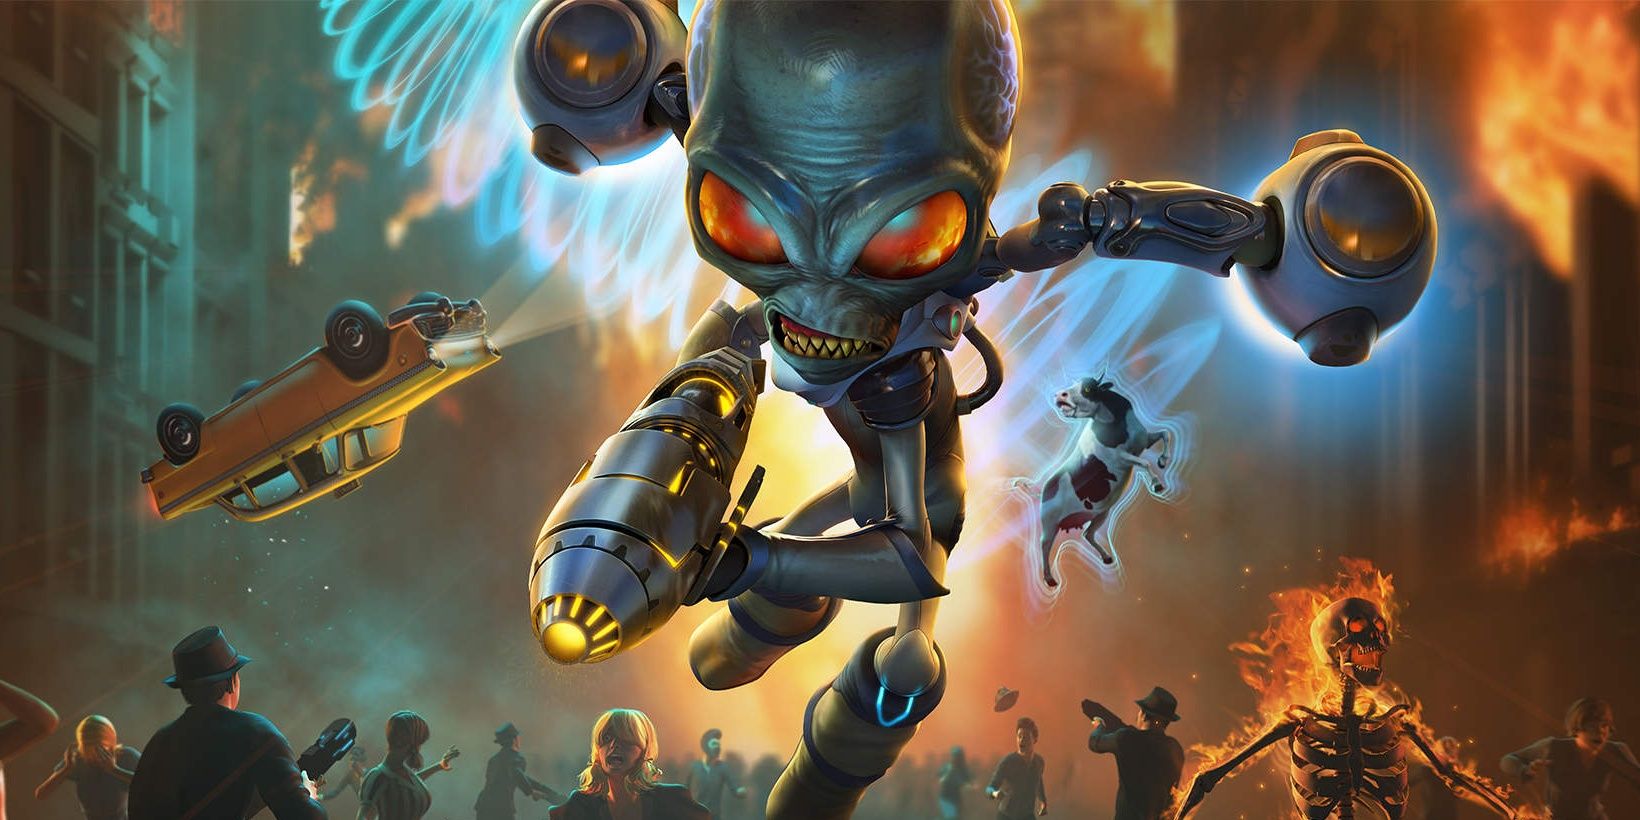 Crypto in Destroy all humans